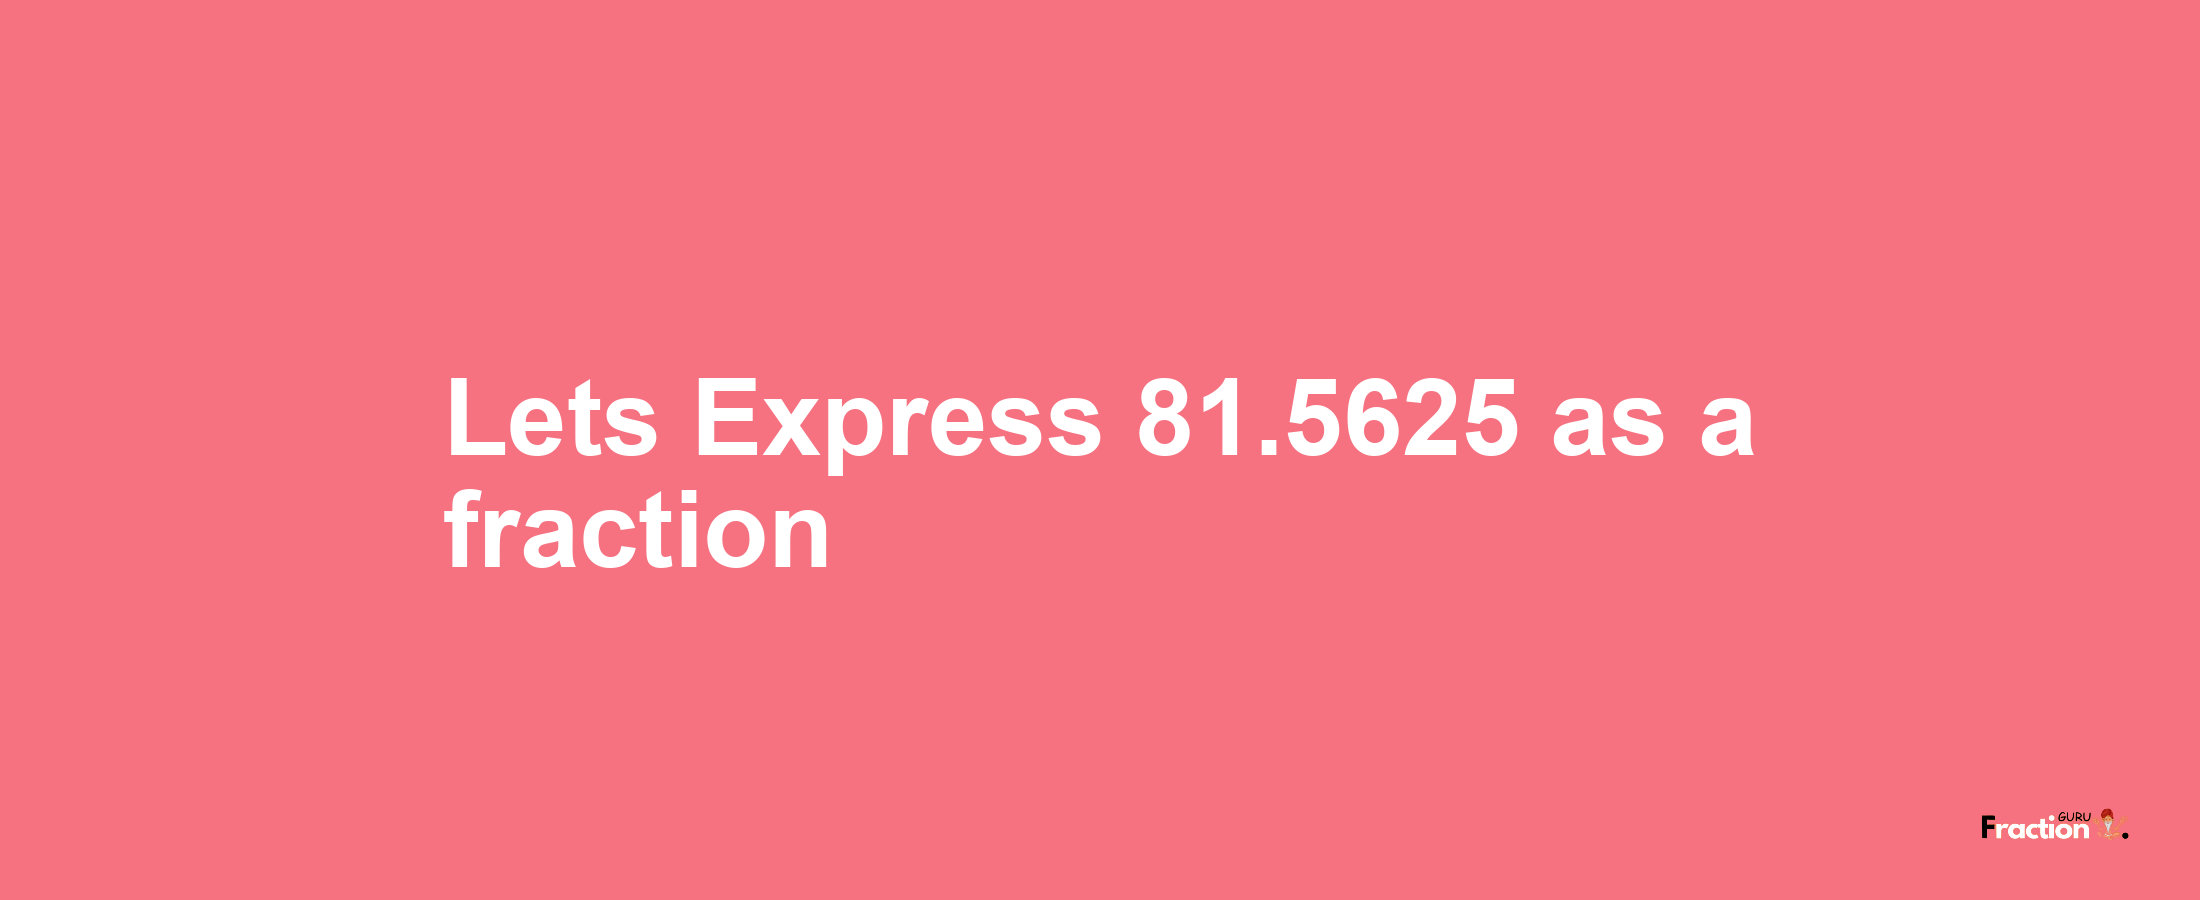 Lets Express 81.5625 as afraction